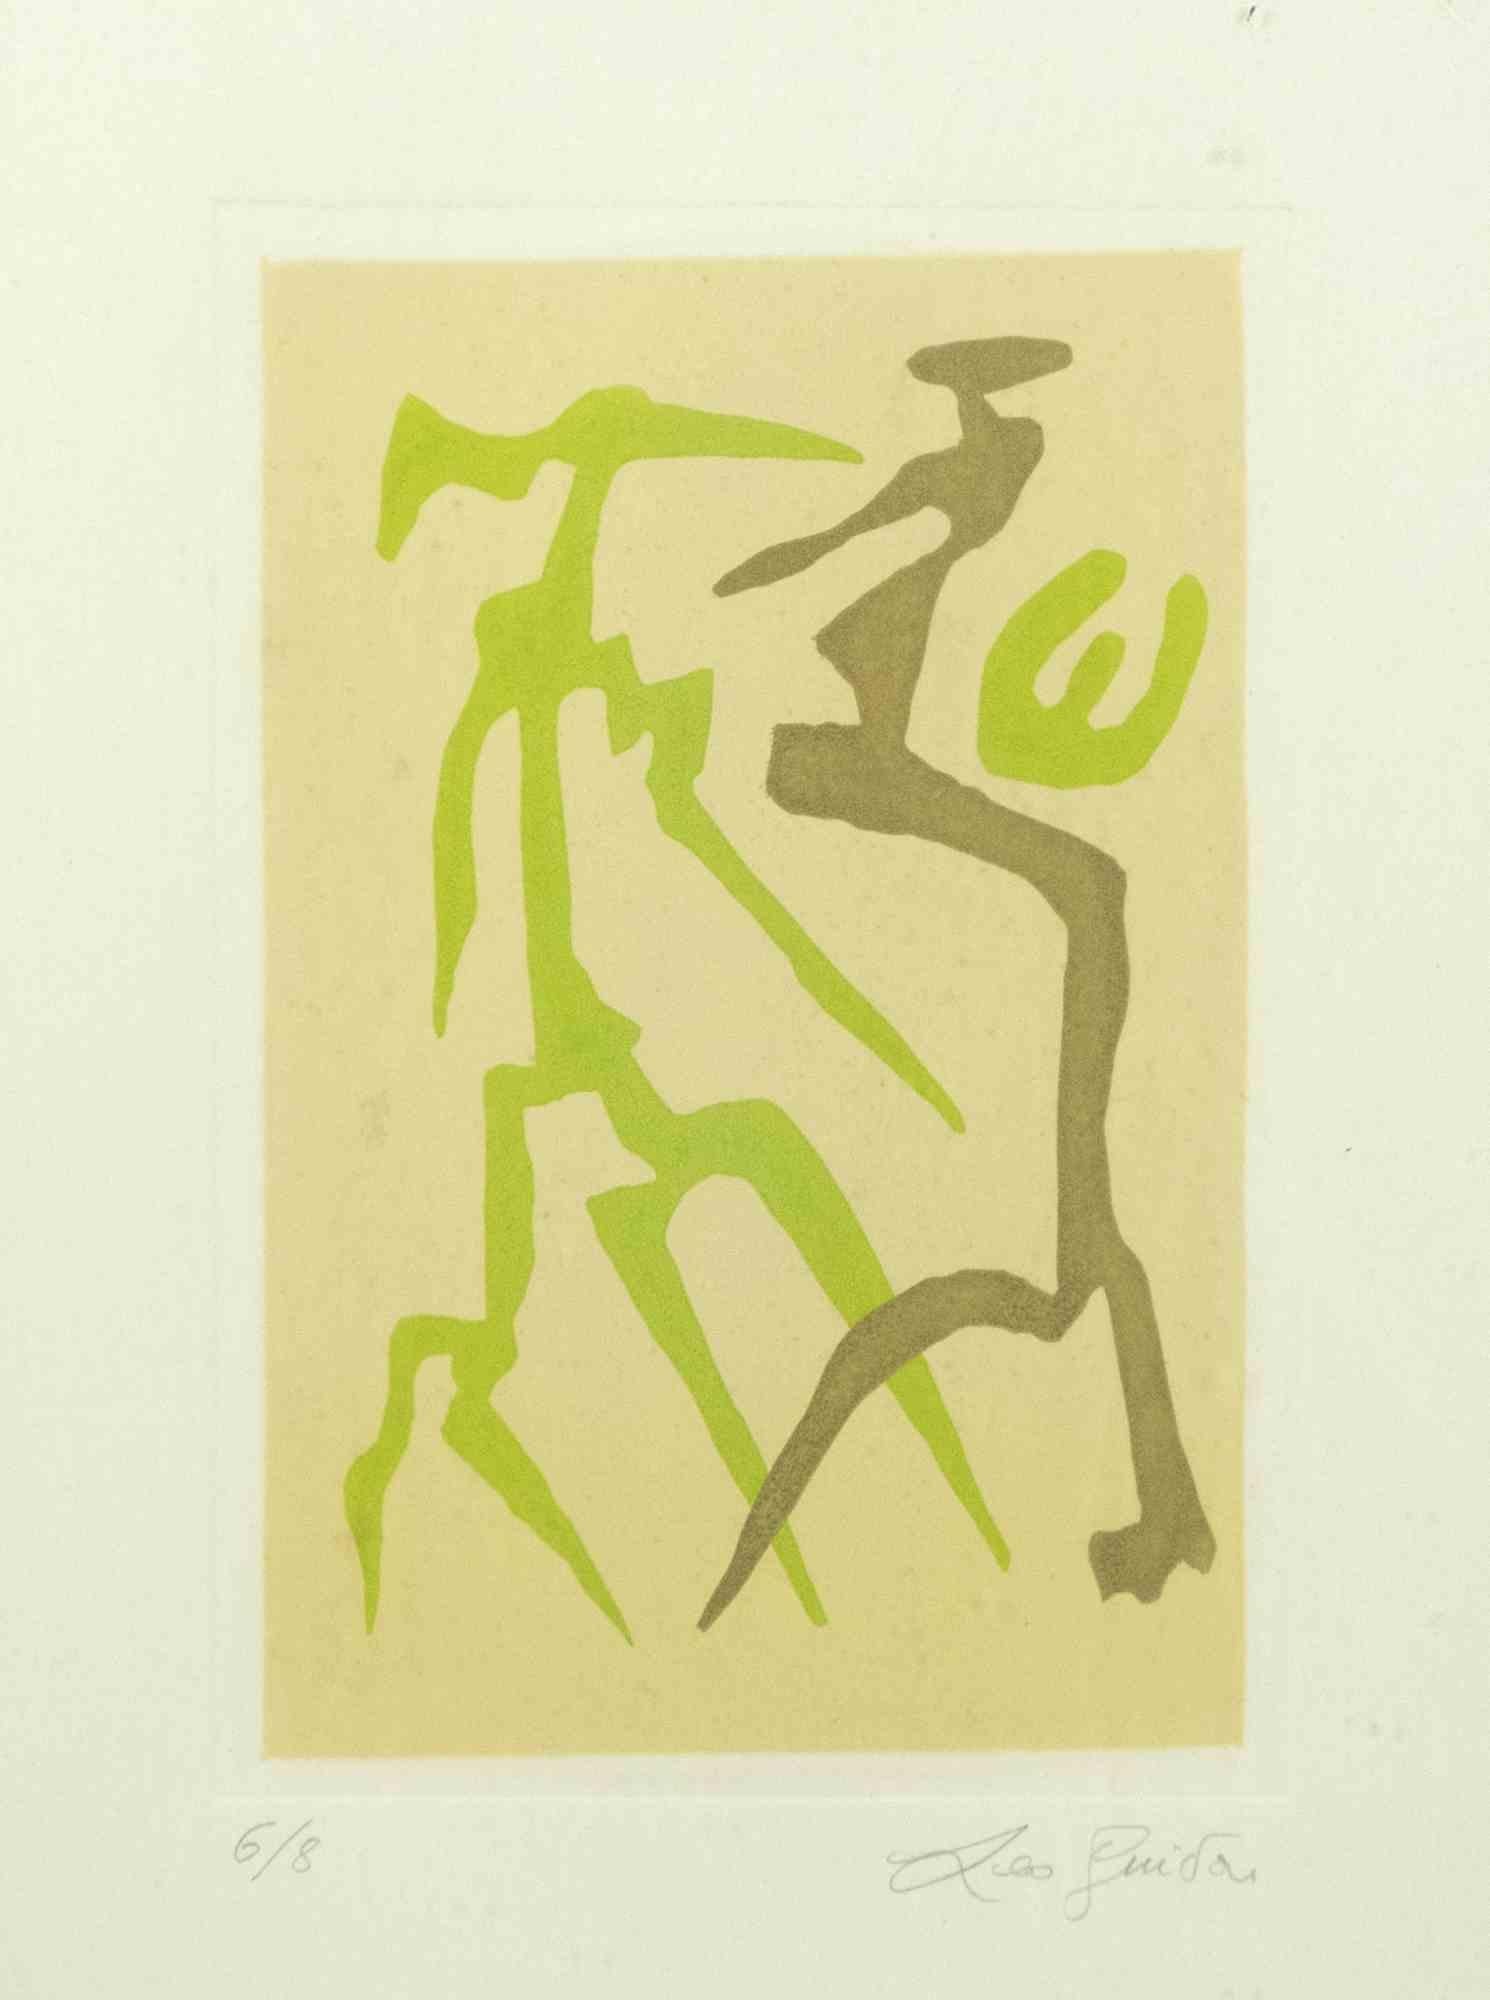 Abstract figures is a contemporary artwork realized by Leo Guida in1970s

Mixed colored etching on paper.

Hand signed, numbered on the lower margin. Edition of 6/8

Includes frame: 58.5 x 49 cm


Leo Guida  (1992 - 2017). Sensitive to current